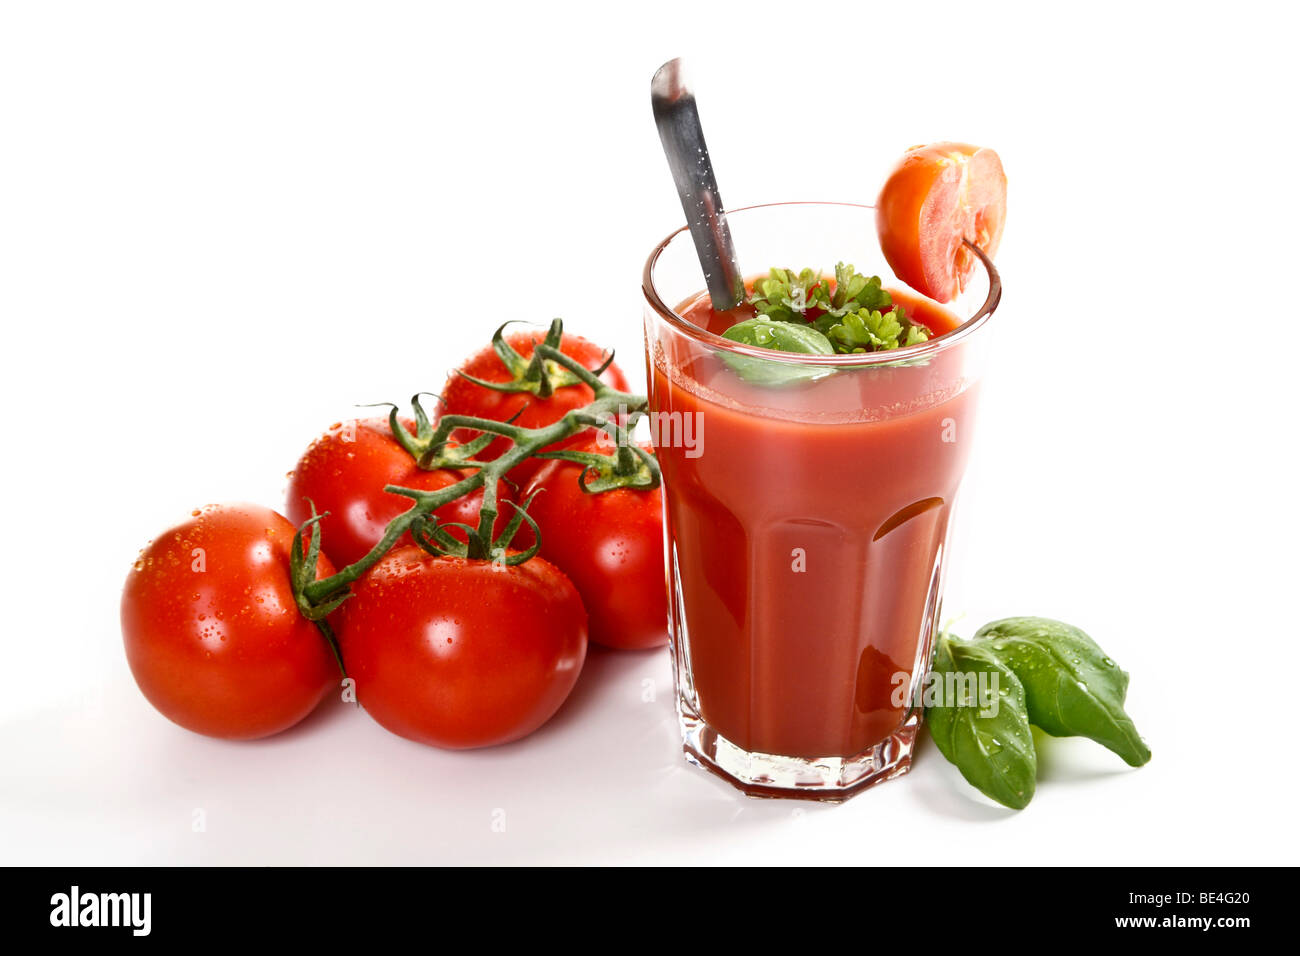 Tomato juice with basil, parsley and beefsteak tomatoes Stock Photo